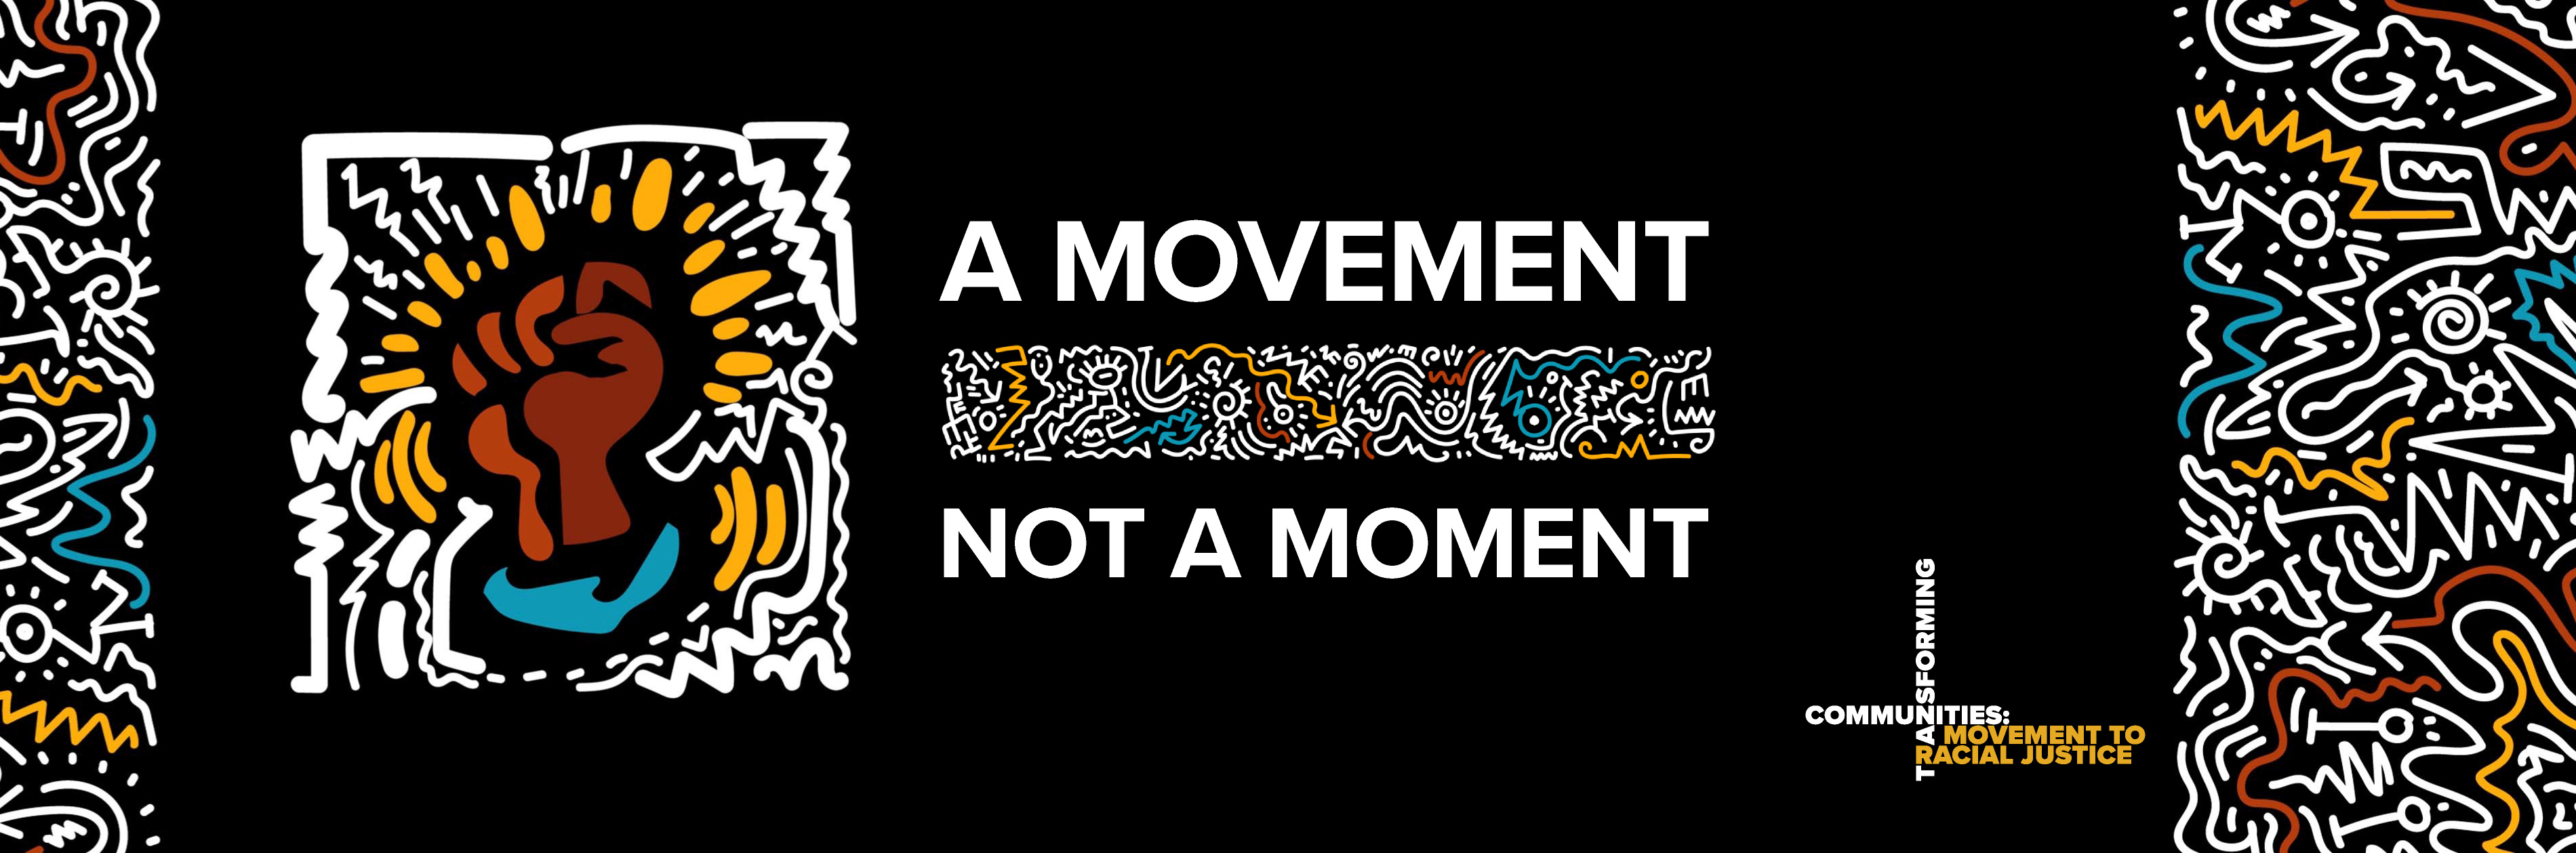 An illustration of a power first with the words A Movement, Not a Moment.